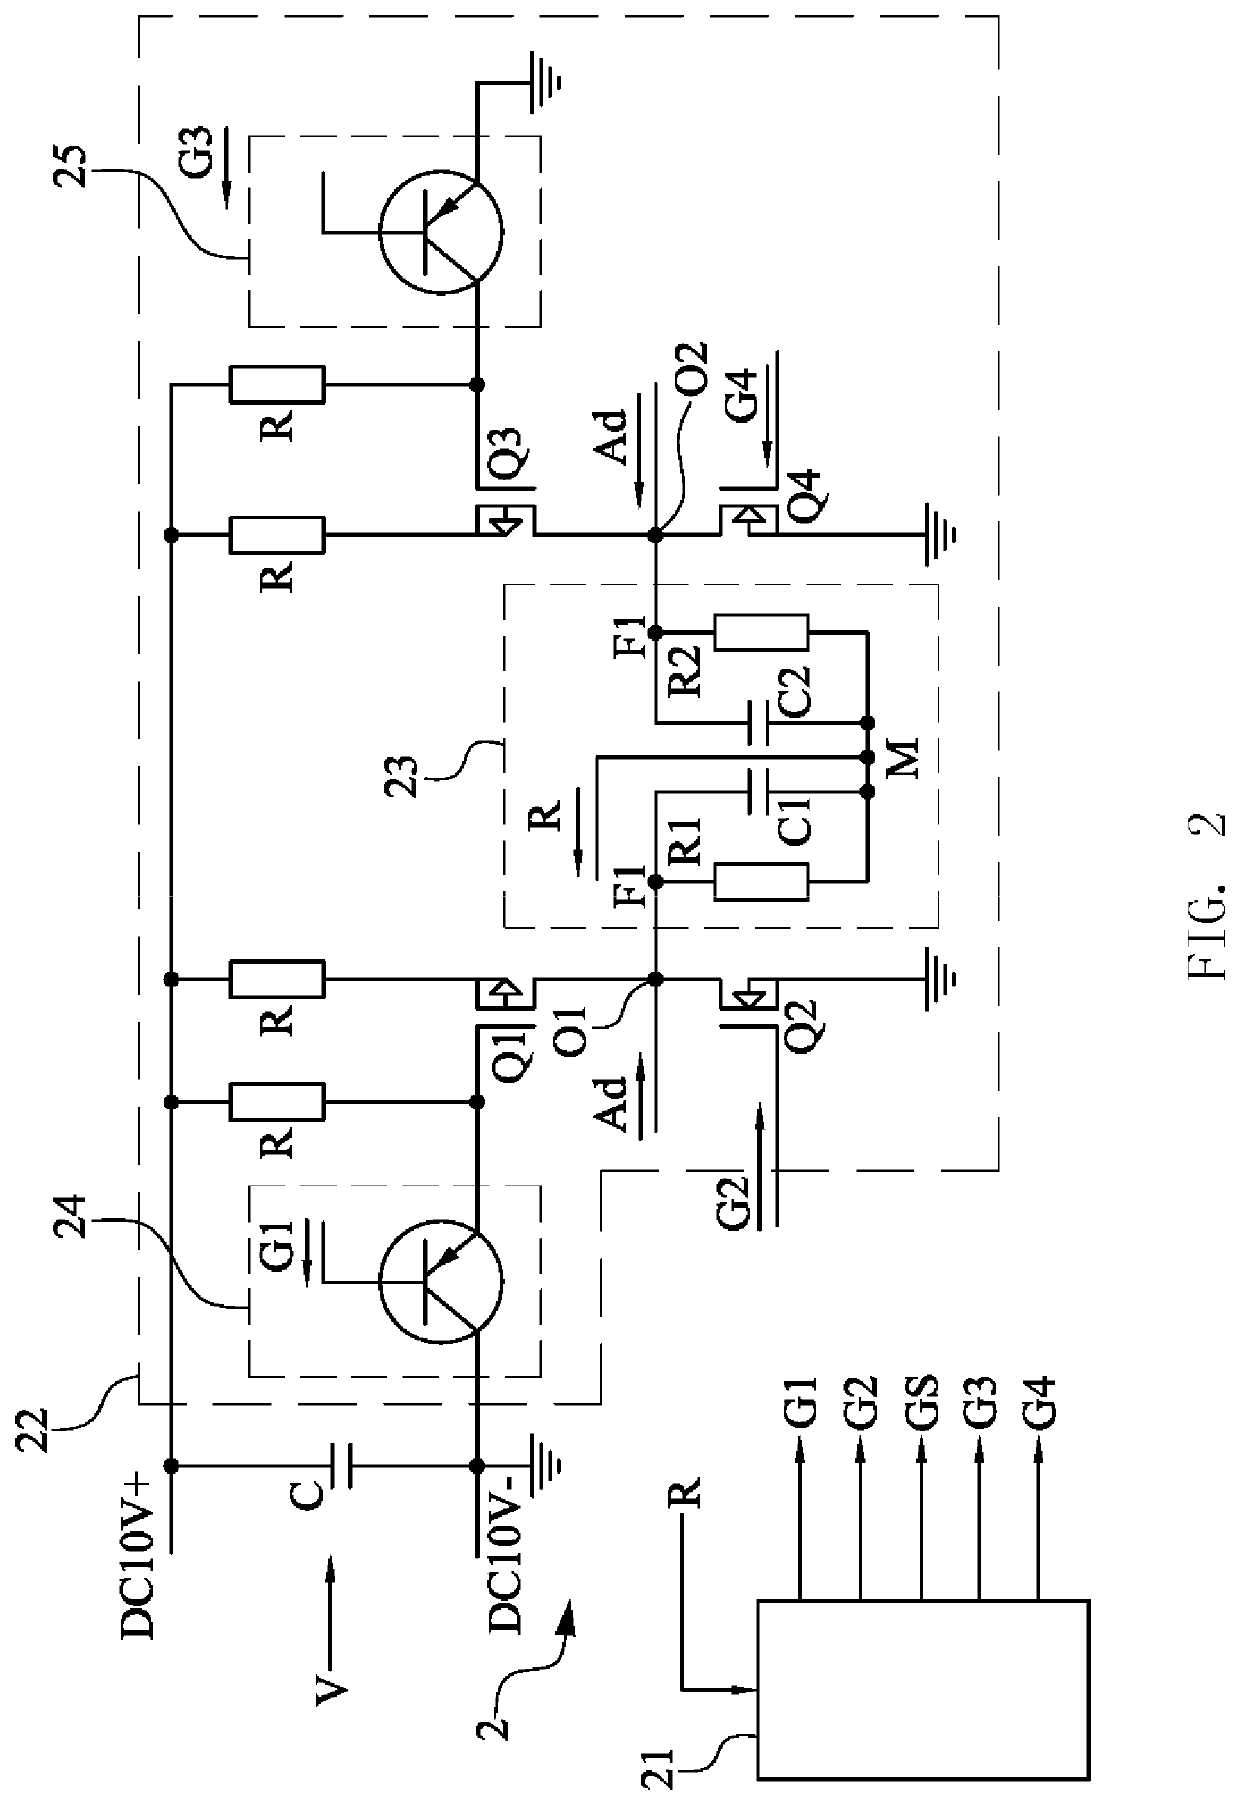 Polarity correction circuit for dimmer